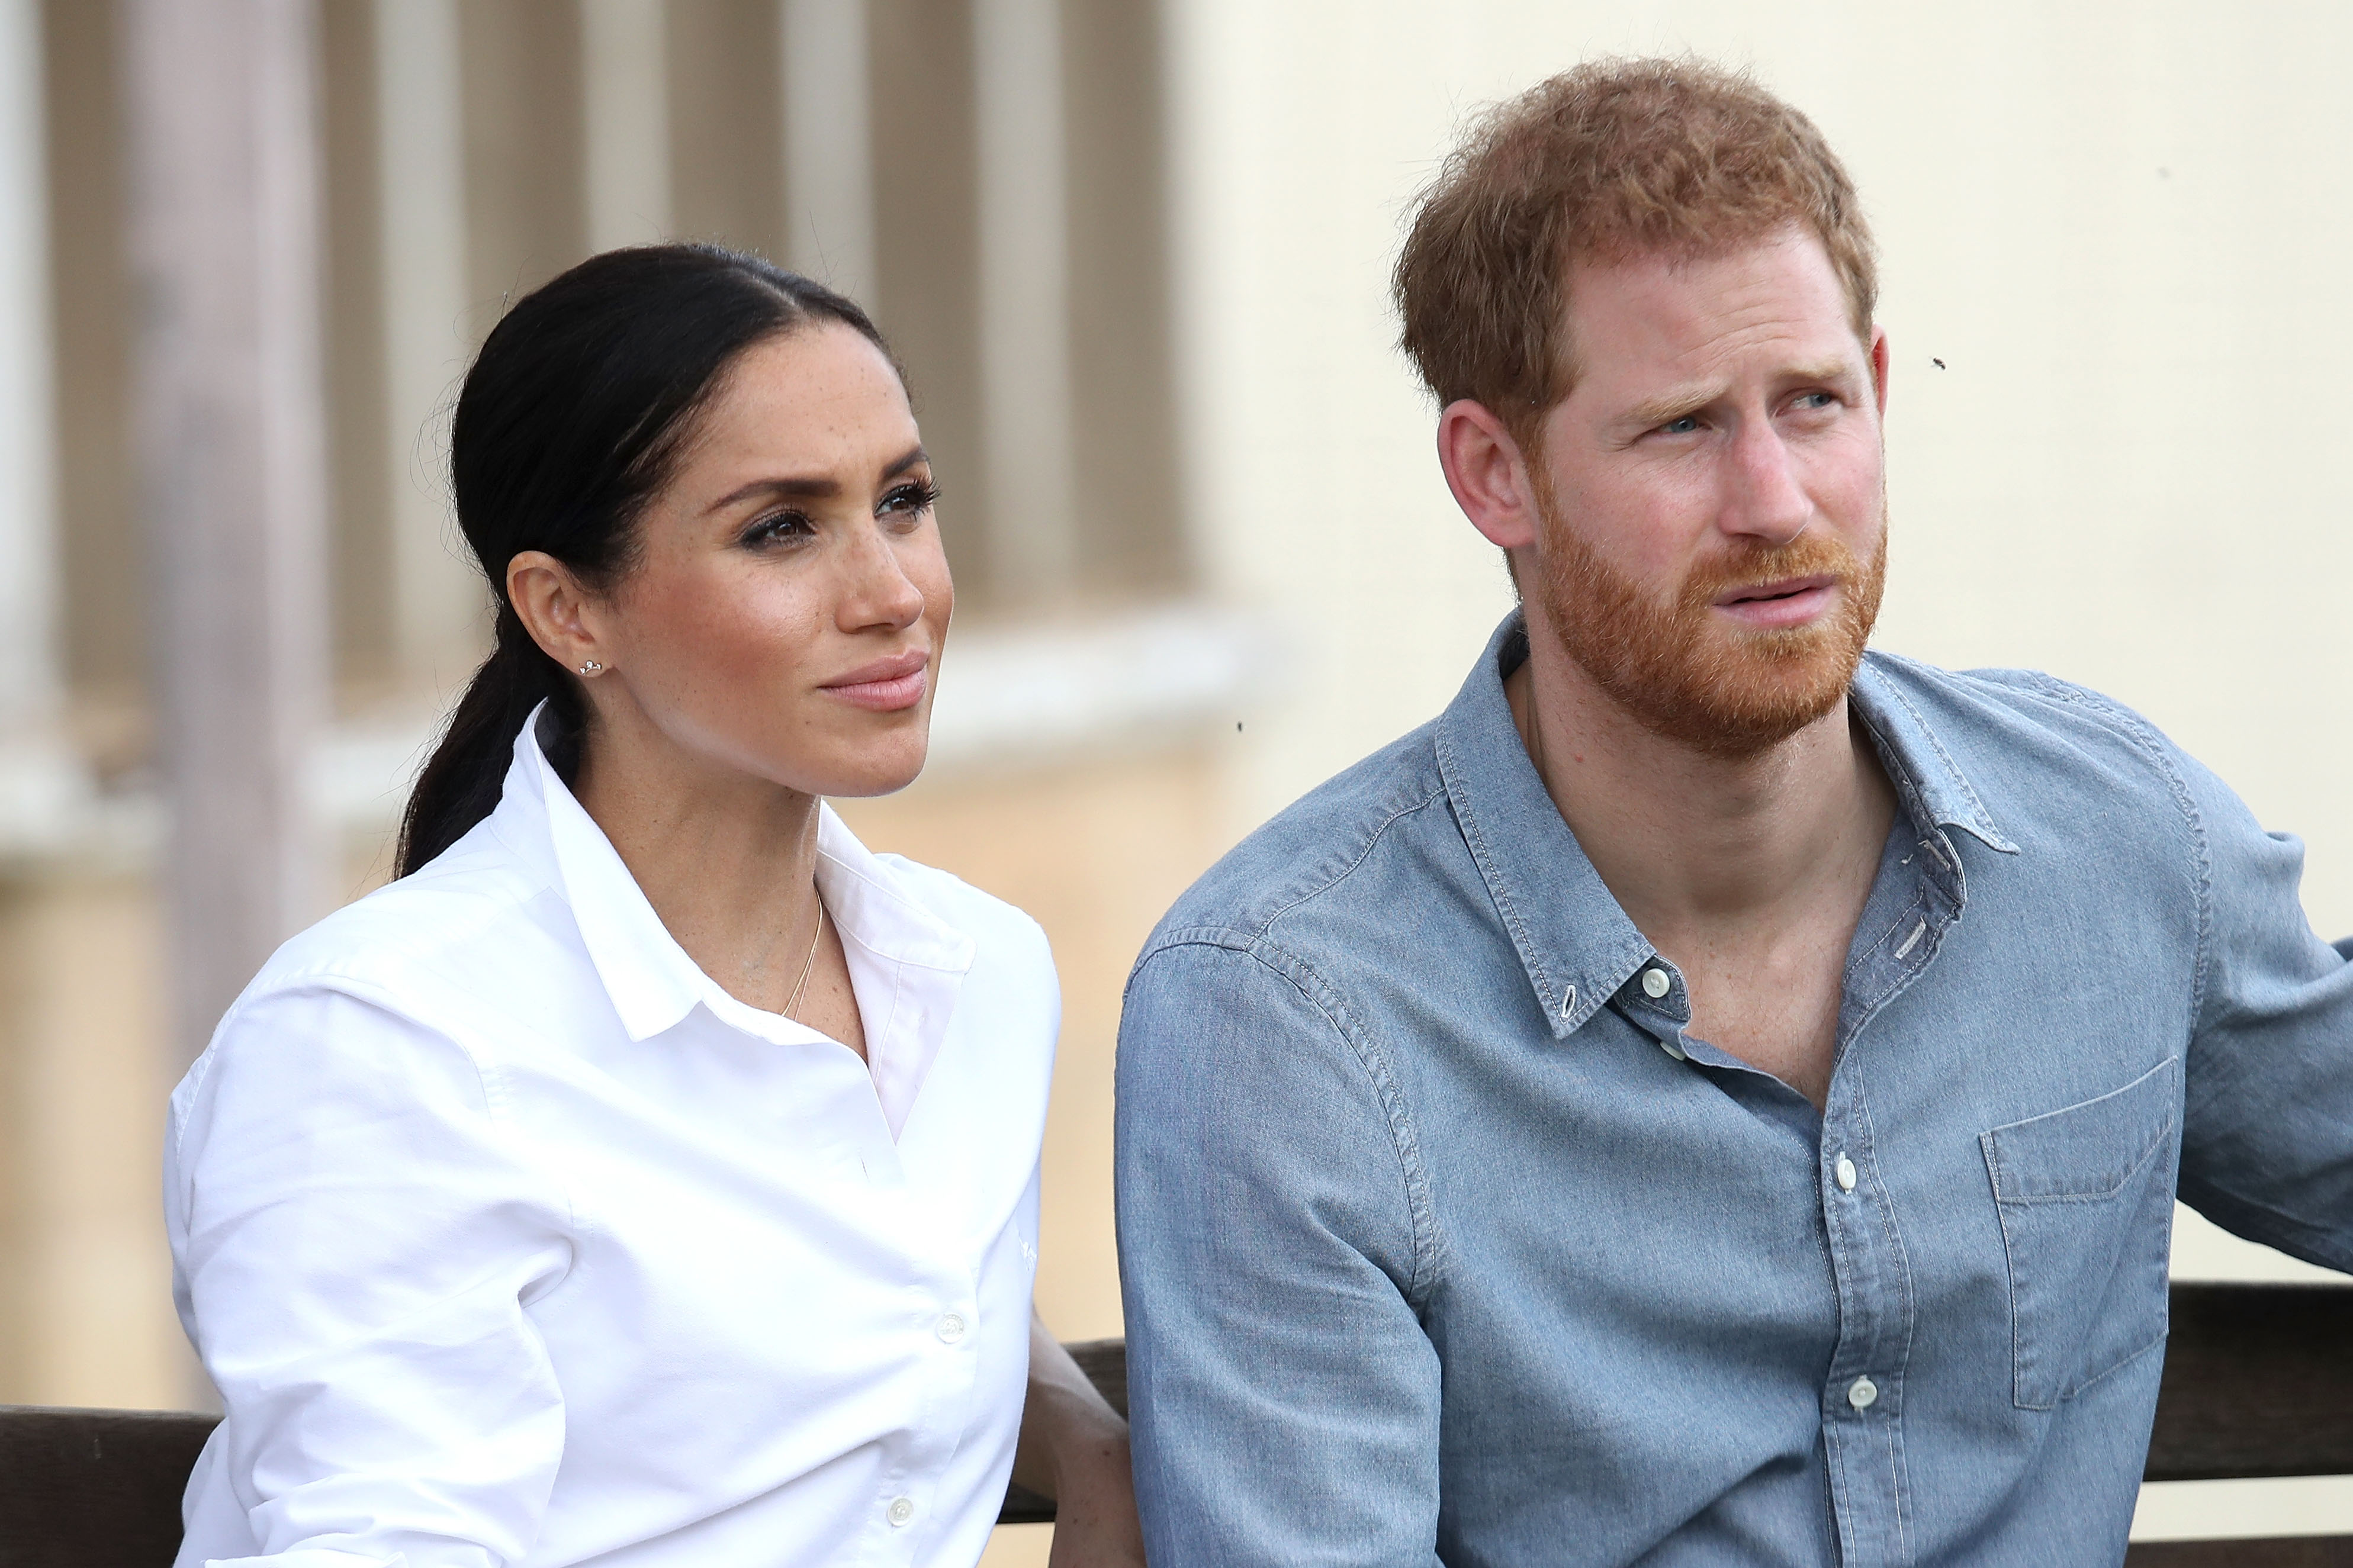 People Are ‘Fed Up’ With Prince Harry and Meghan Markle, Royal Expert Says ‘We’ve All Had Enough’